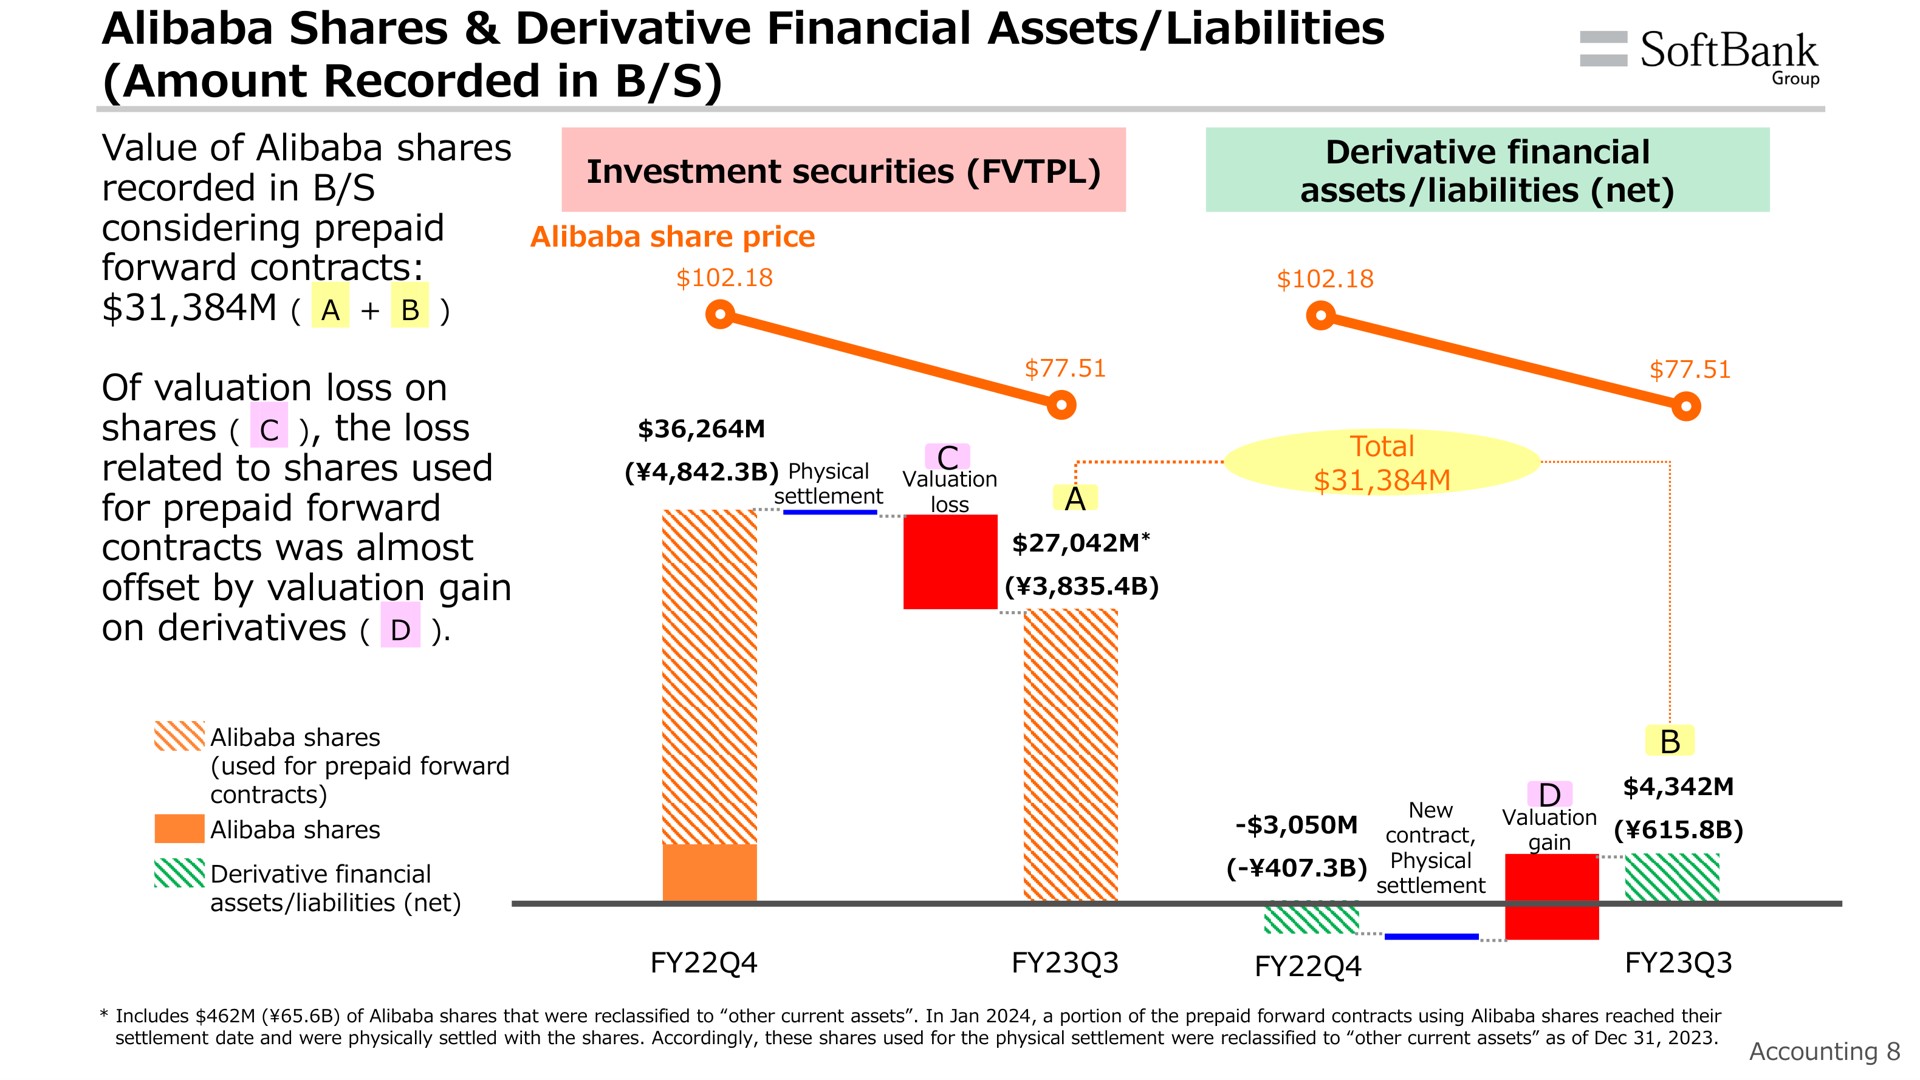 shares derivative financial assets liabilities amount recorded in value of shares recorded in considering prepaid forward contracts a of valuation loss on shares the loss related to shares used for prepaid forward contracts was almost offset by valuation gain on derivatives waive nana sah bank group set els ras total | SoftBank